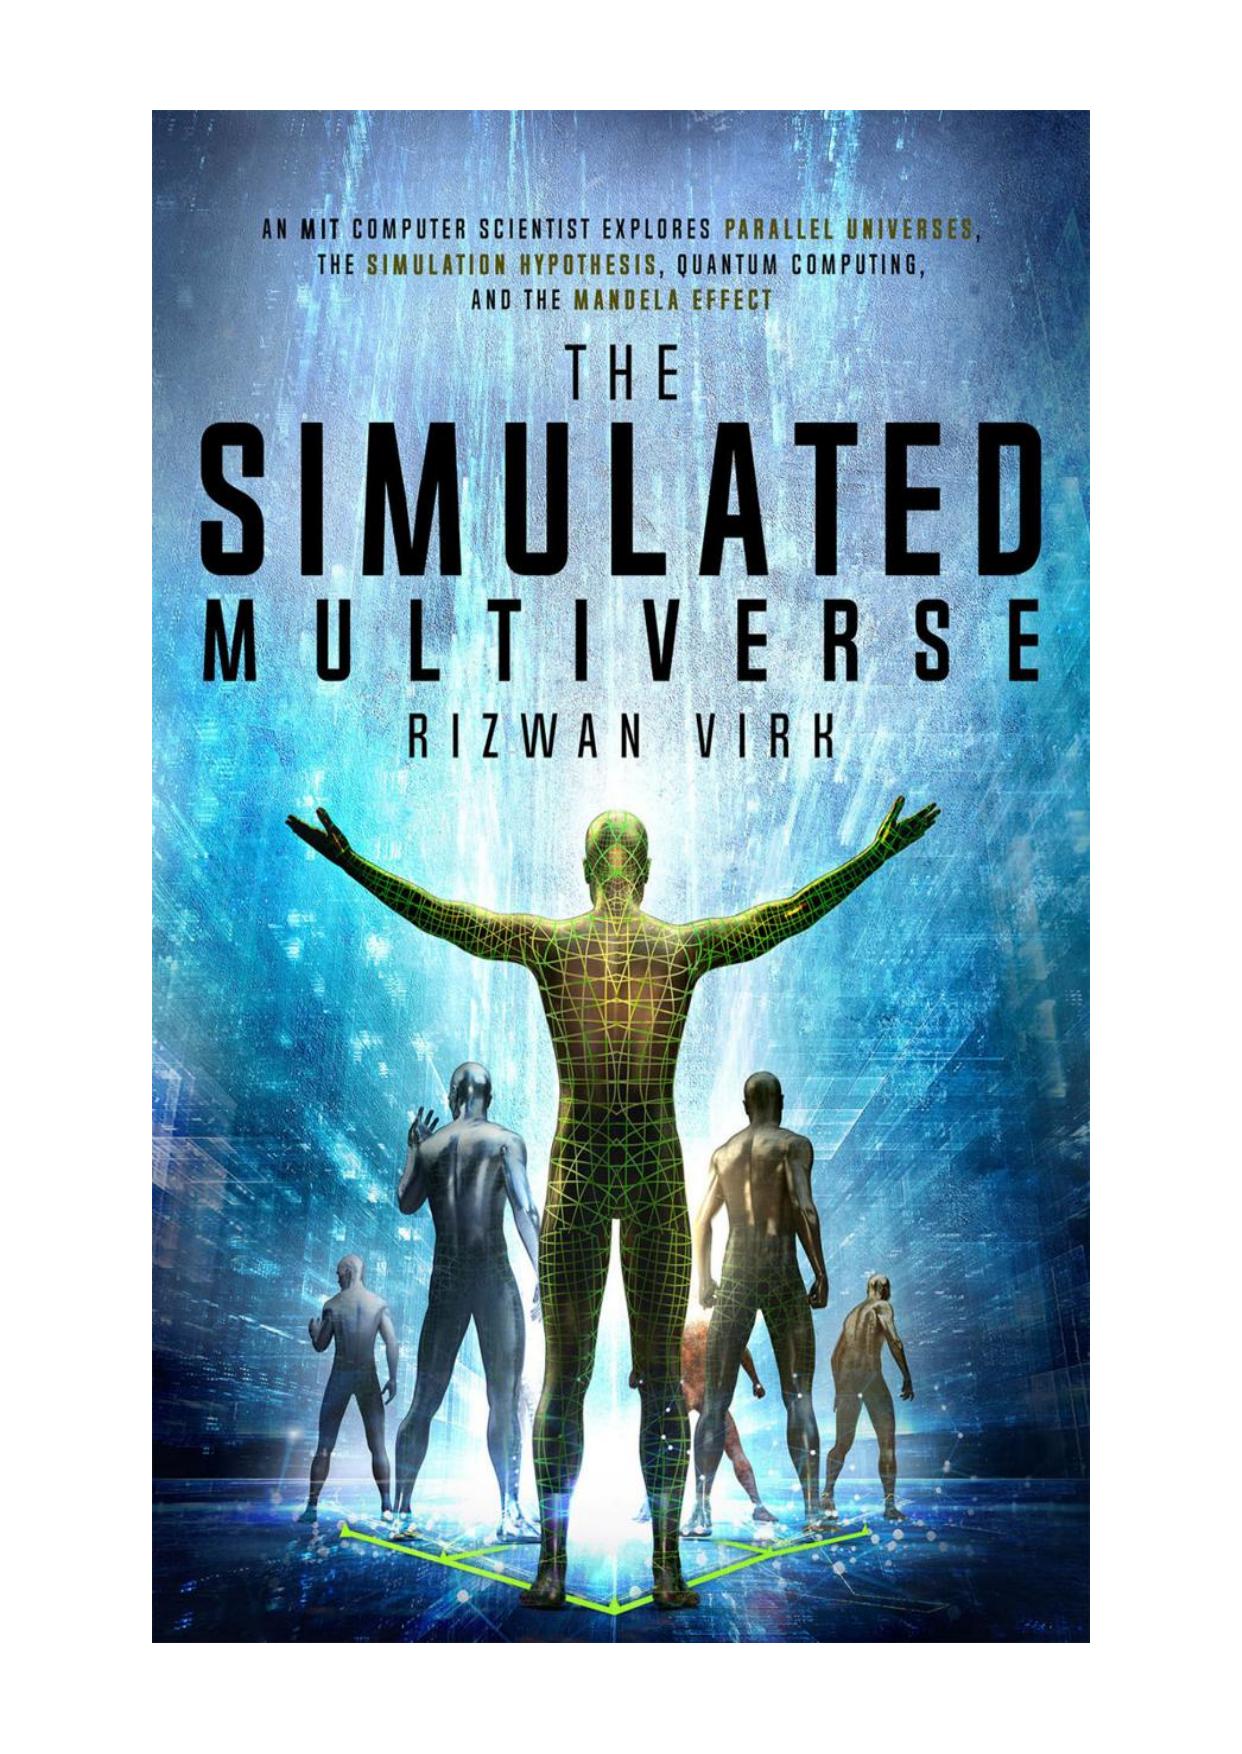 The Simulated Multiverse - An MIT Computer Scientist Explores Parallel Universes, The Simulation Hypothesis, Quantum Computing